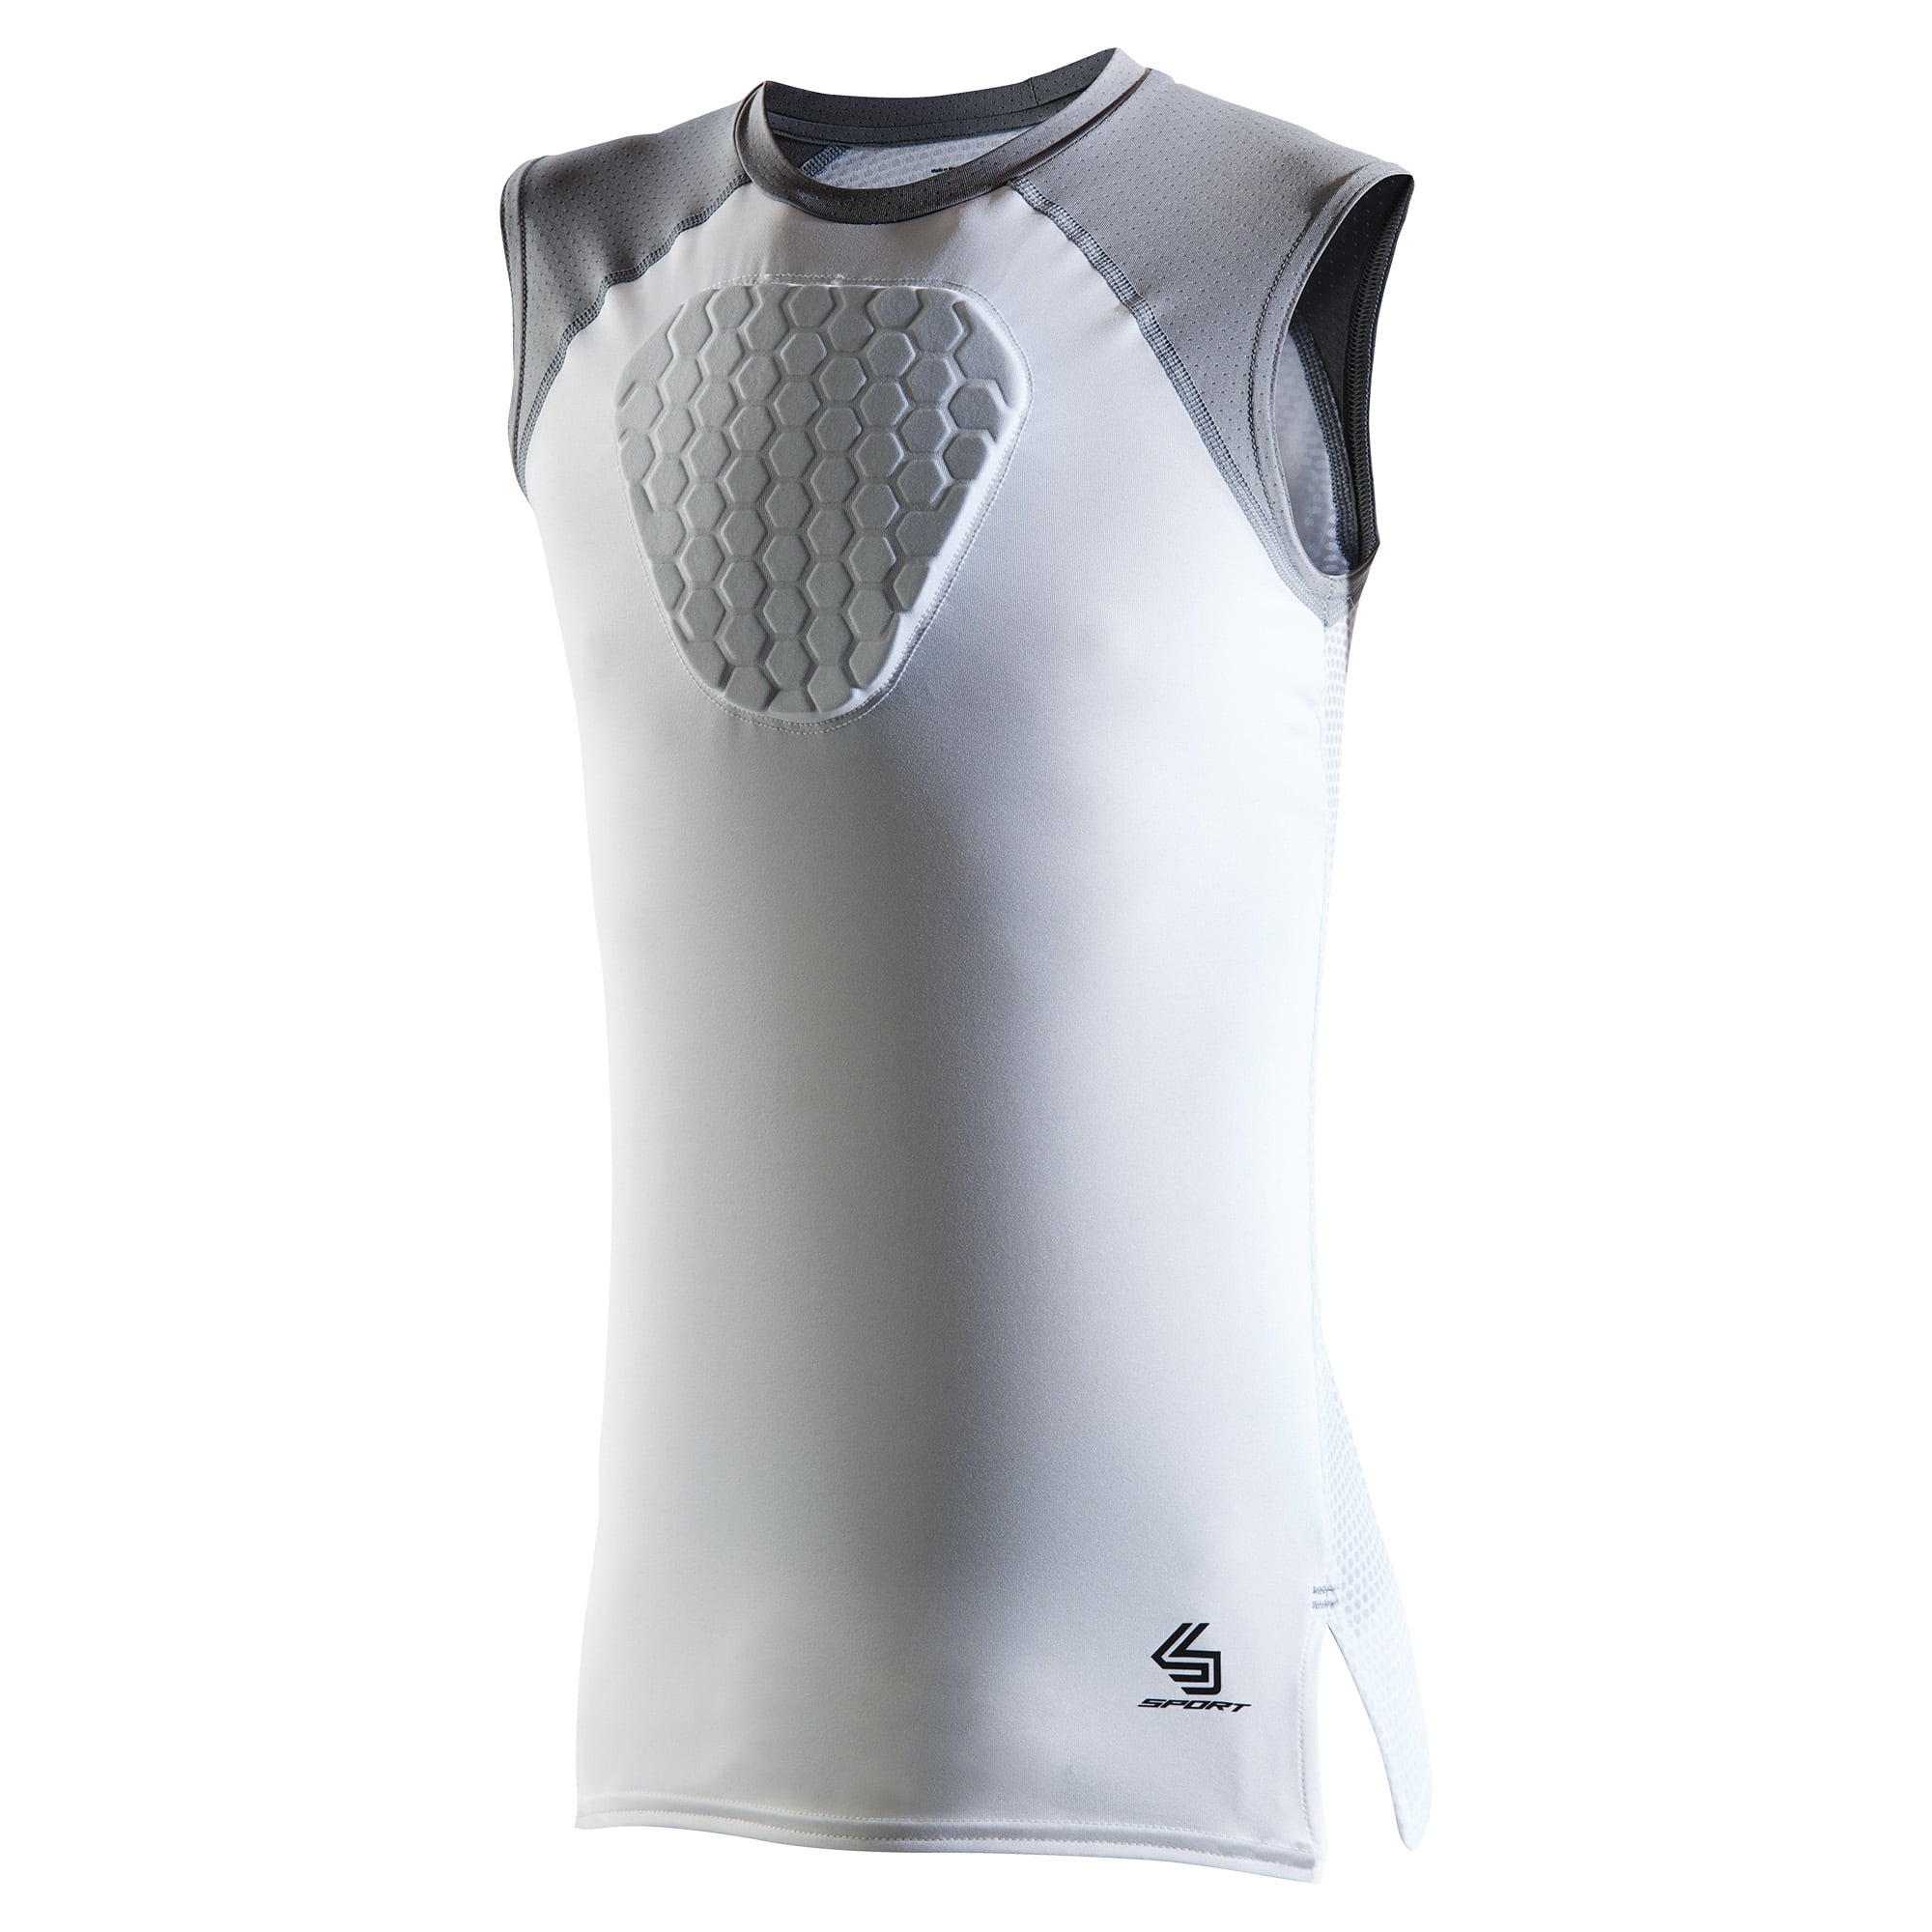 LARGE McDAVID HEXPAD RUGBY BODY PROTECTION SIZE 